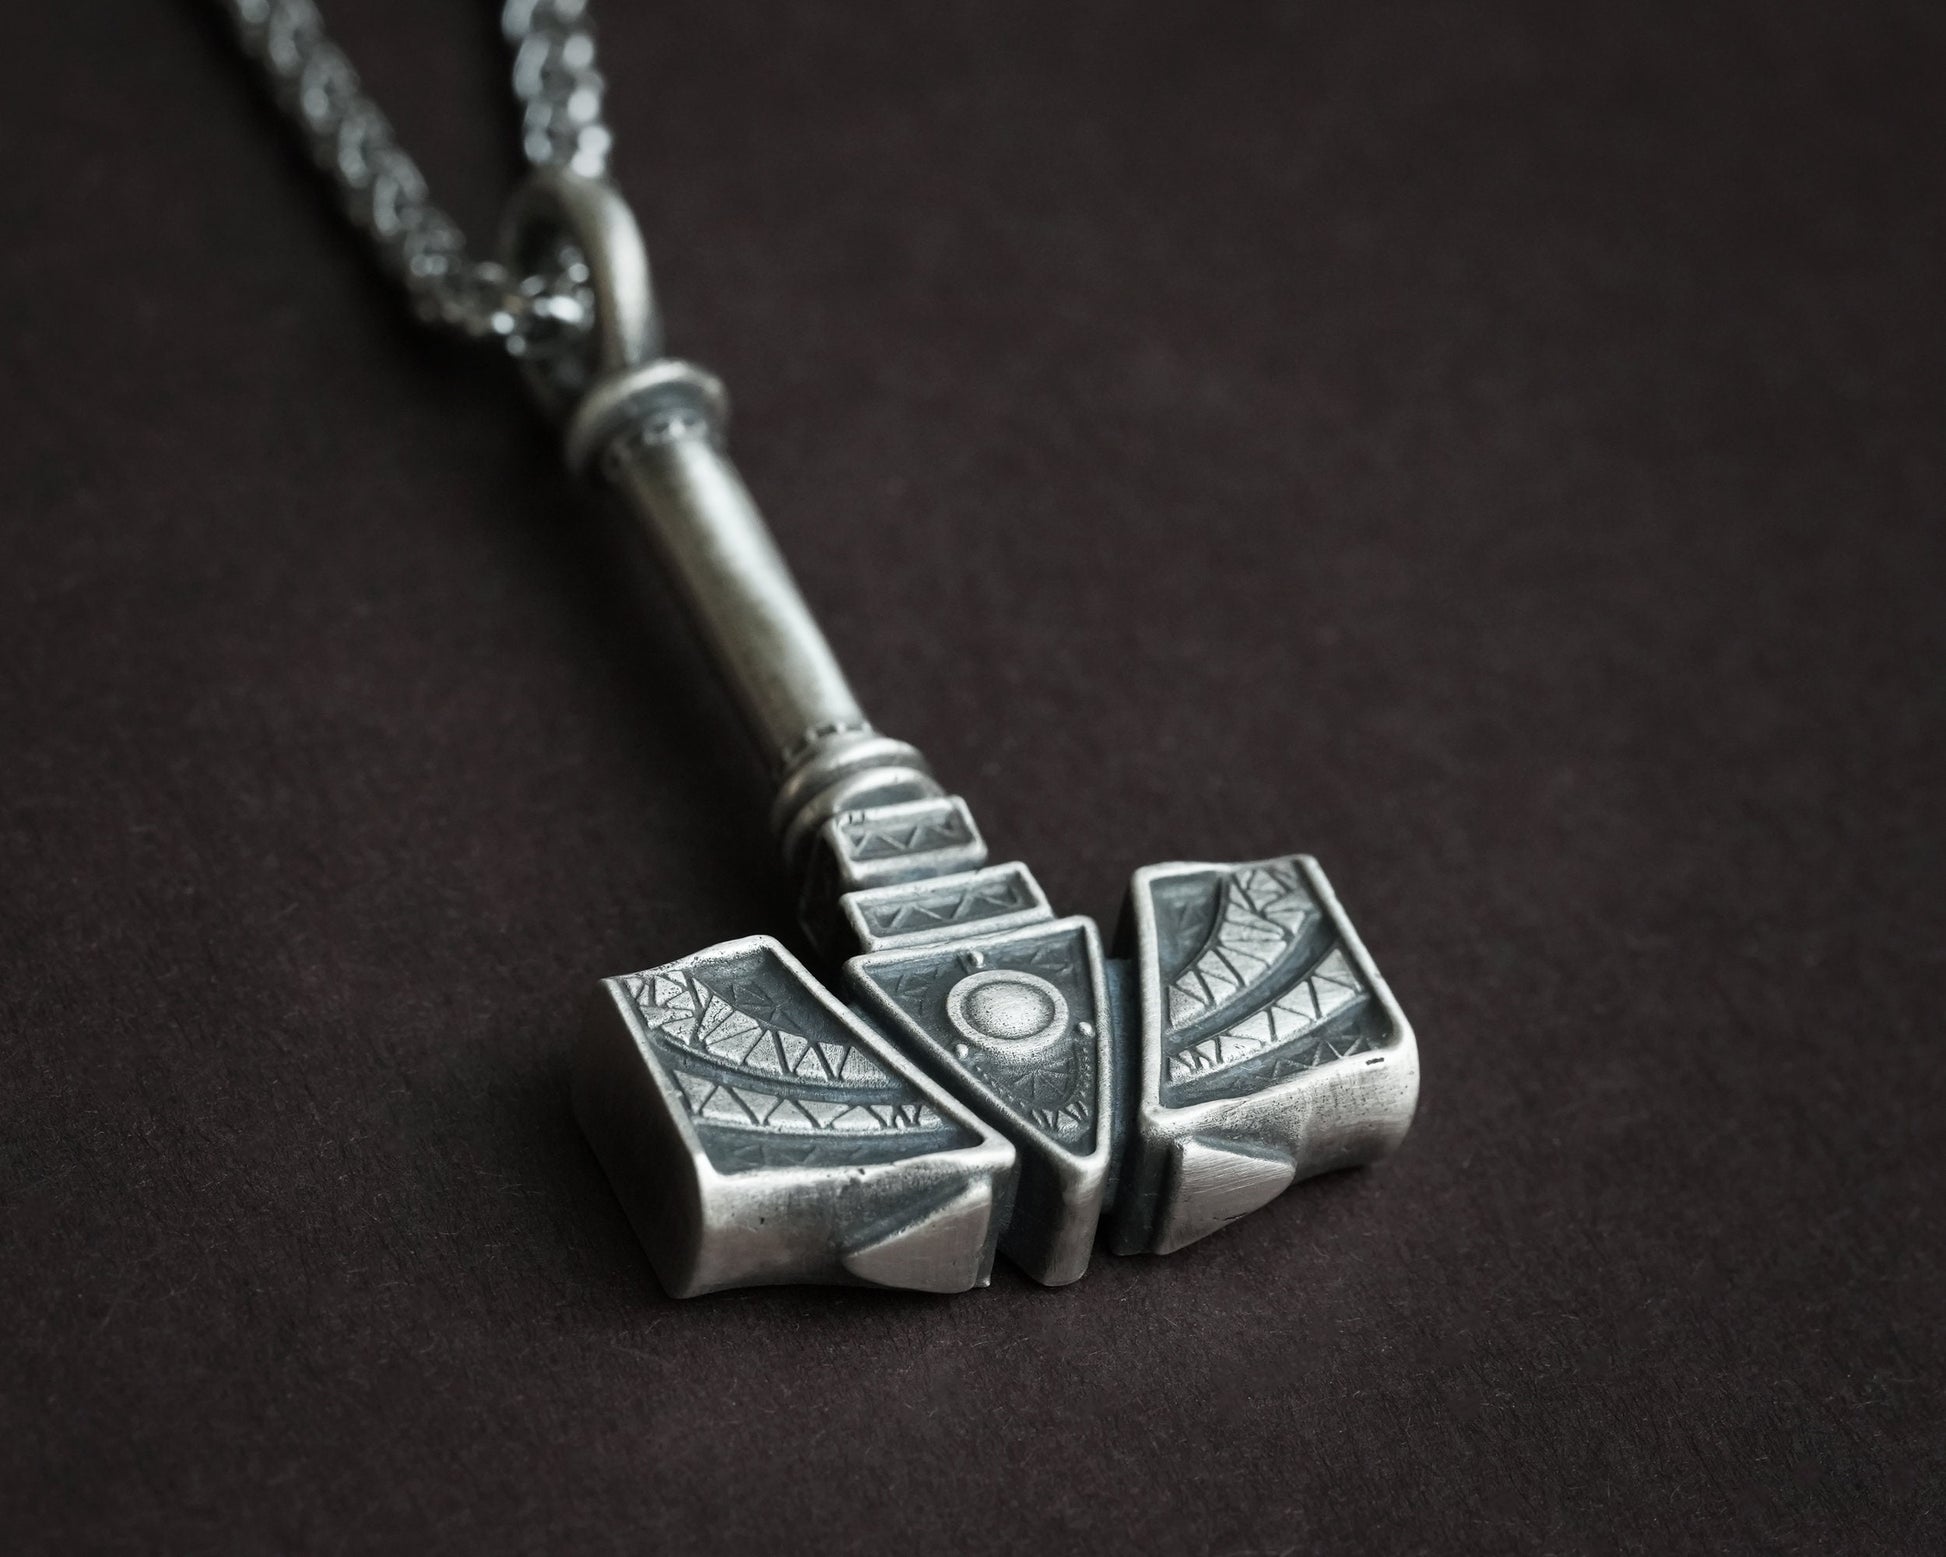 Handmade Viking Thors Hammer Necklace For Men and Women With Strong 22 Inches Long Chain, Brass / 925 Sterling Silver Casting - Baldur Jewelry